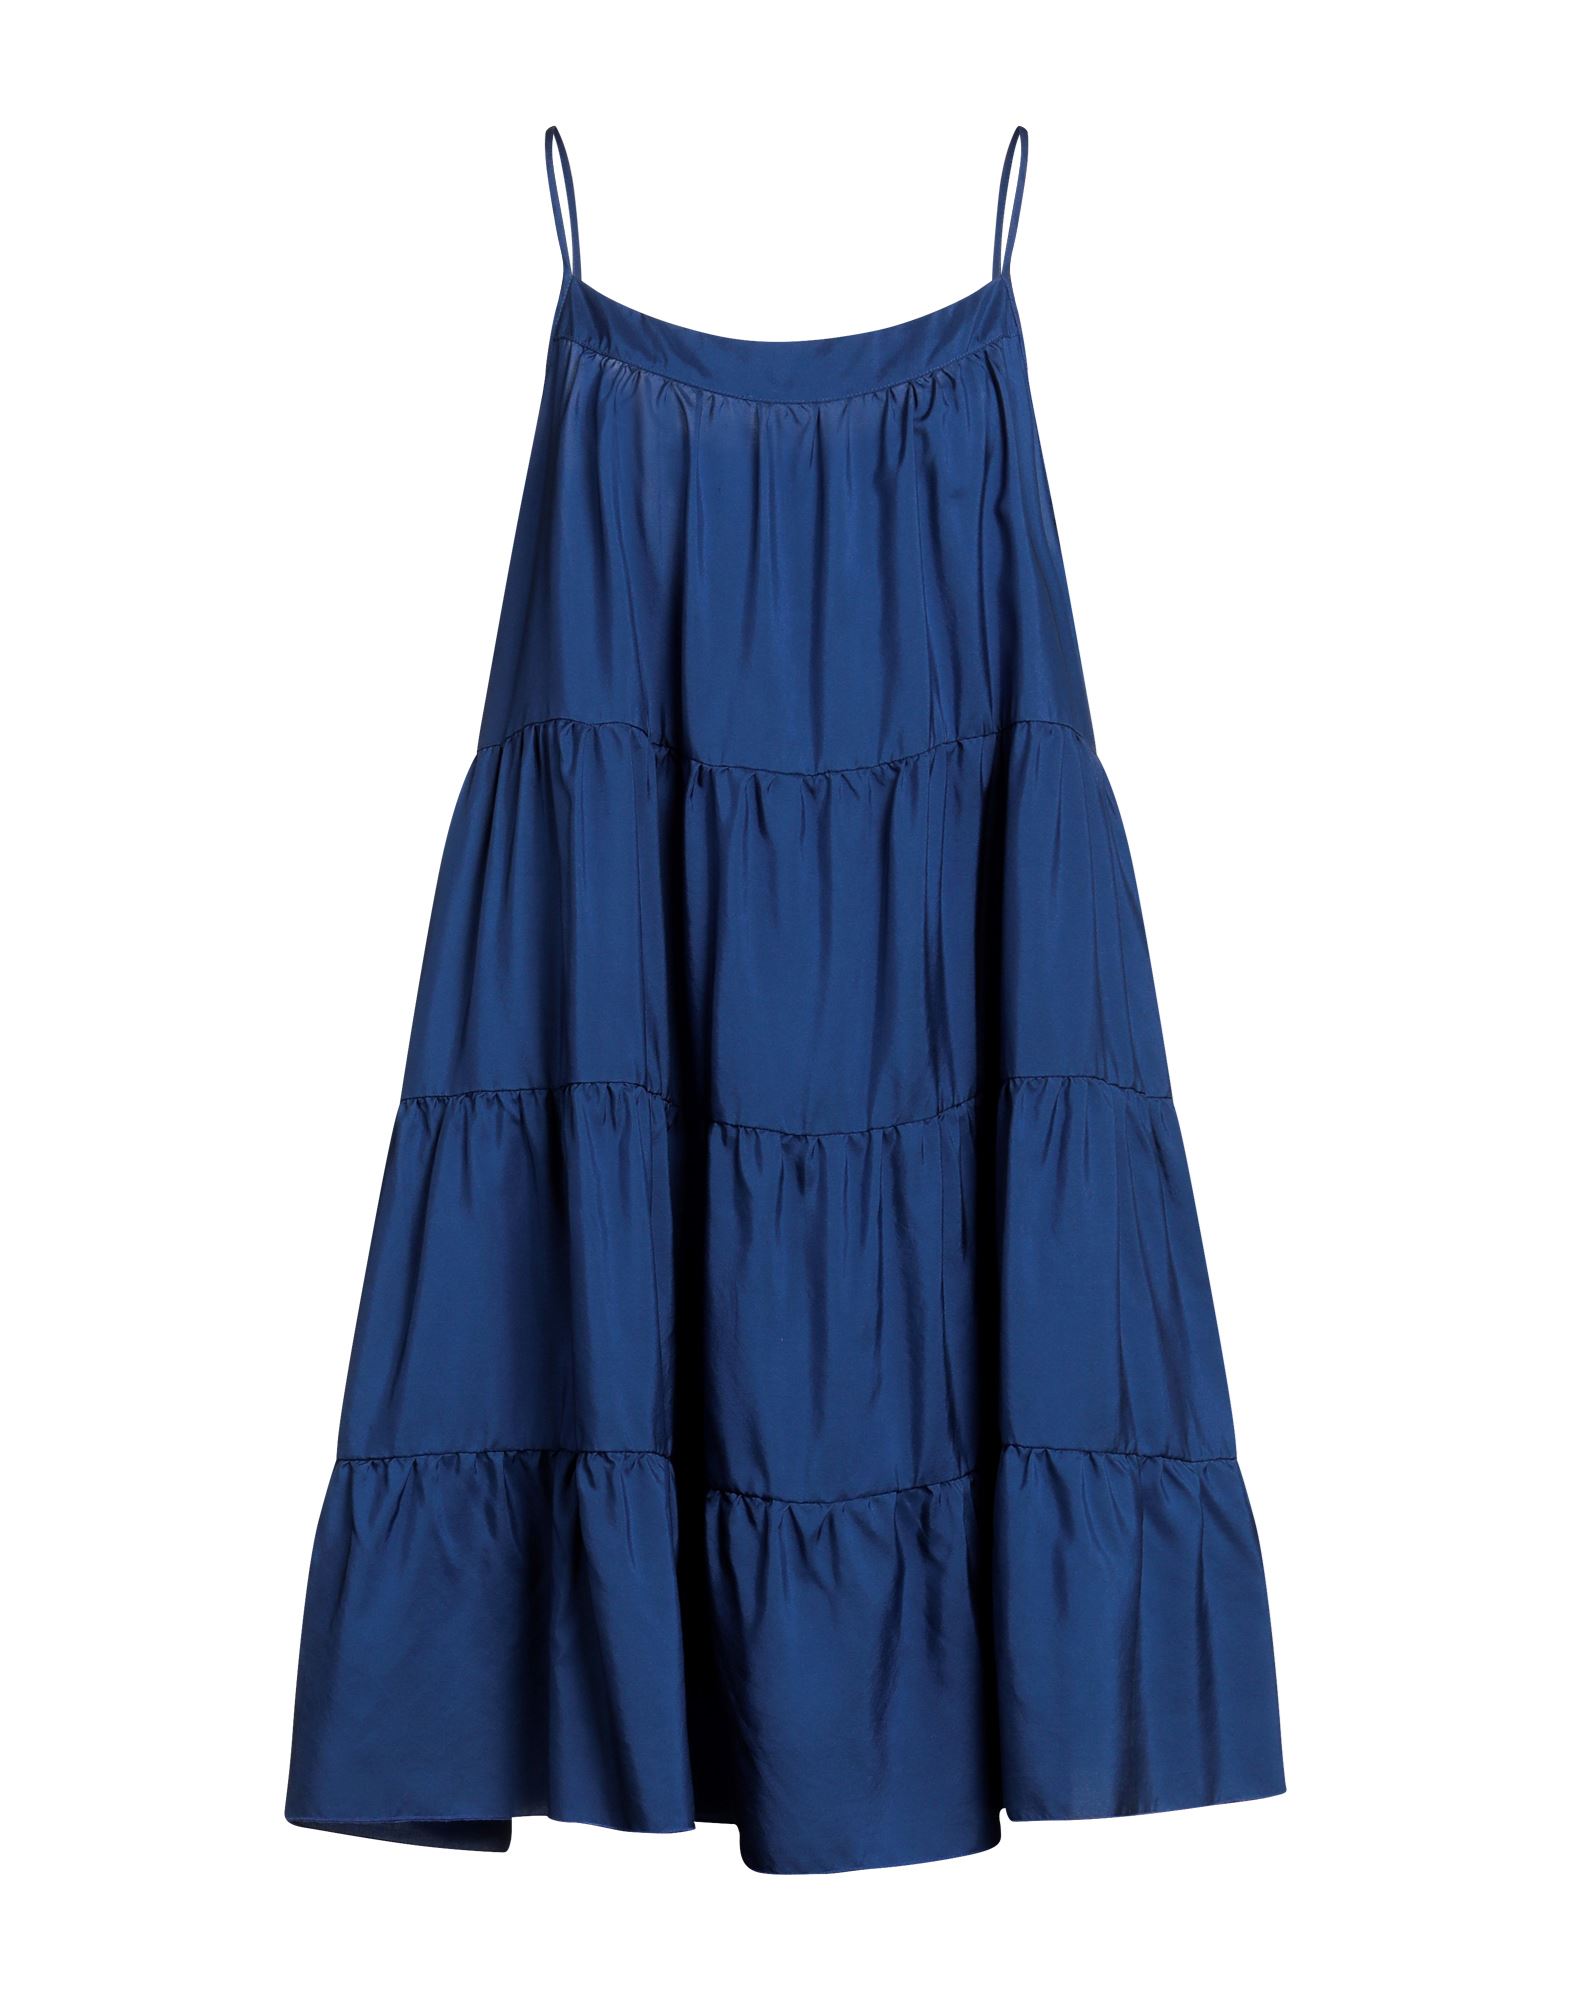 Semicouture Short Dresses In Navy Blue